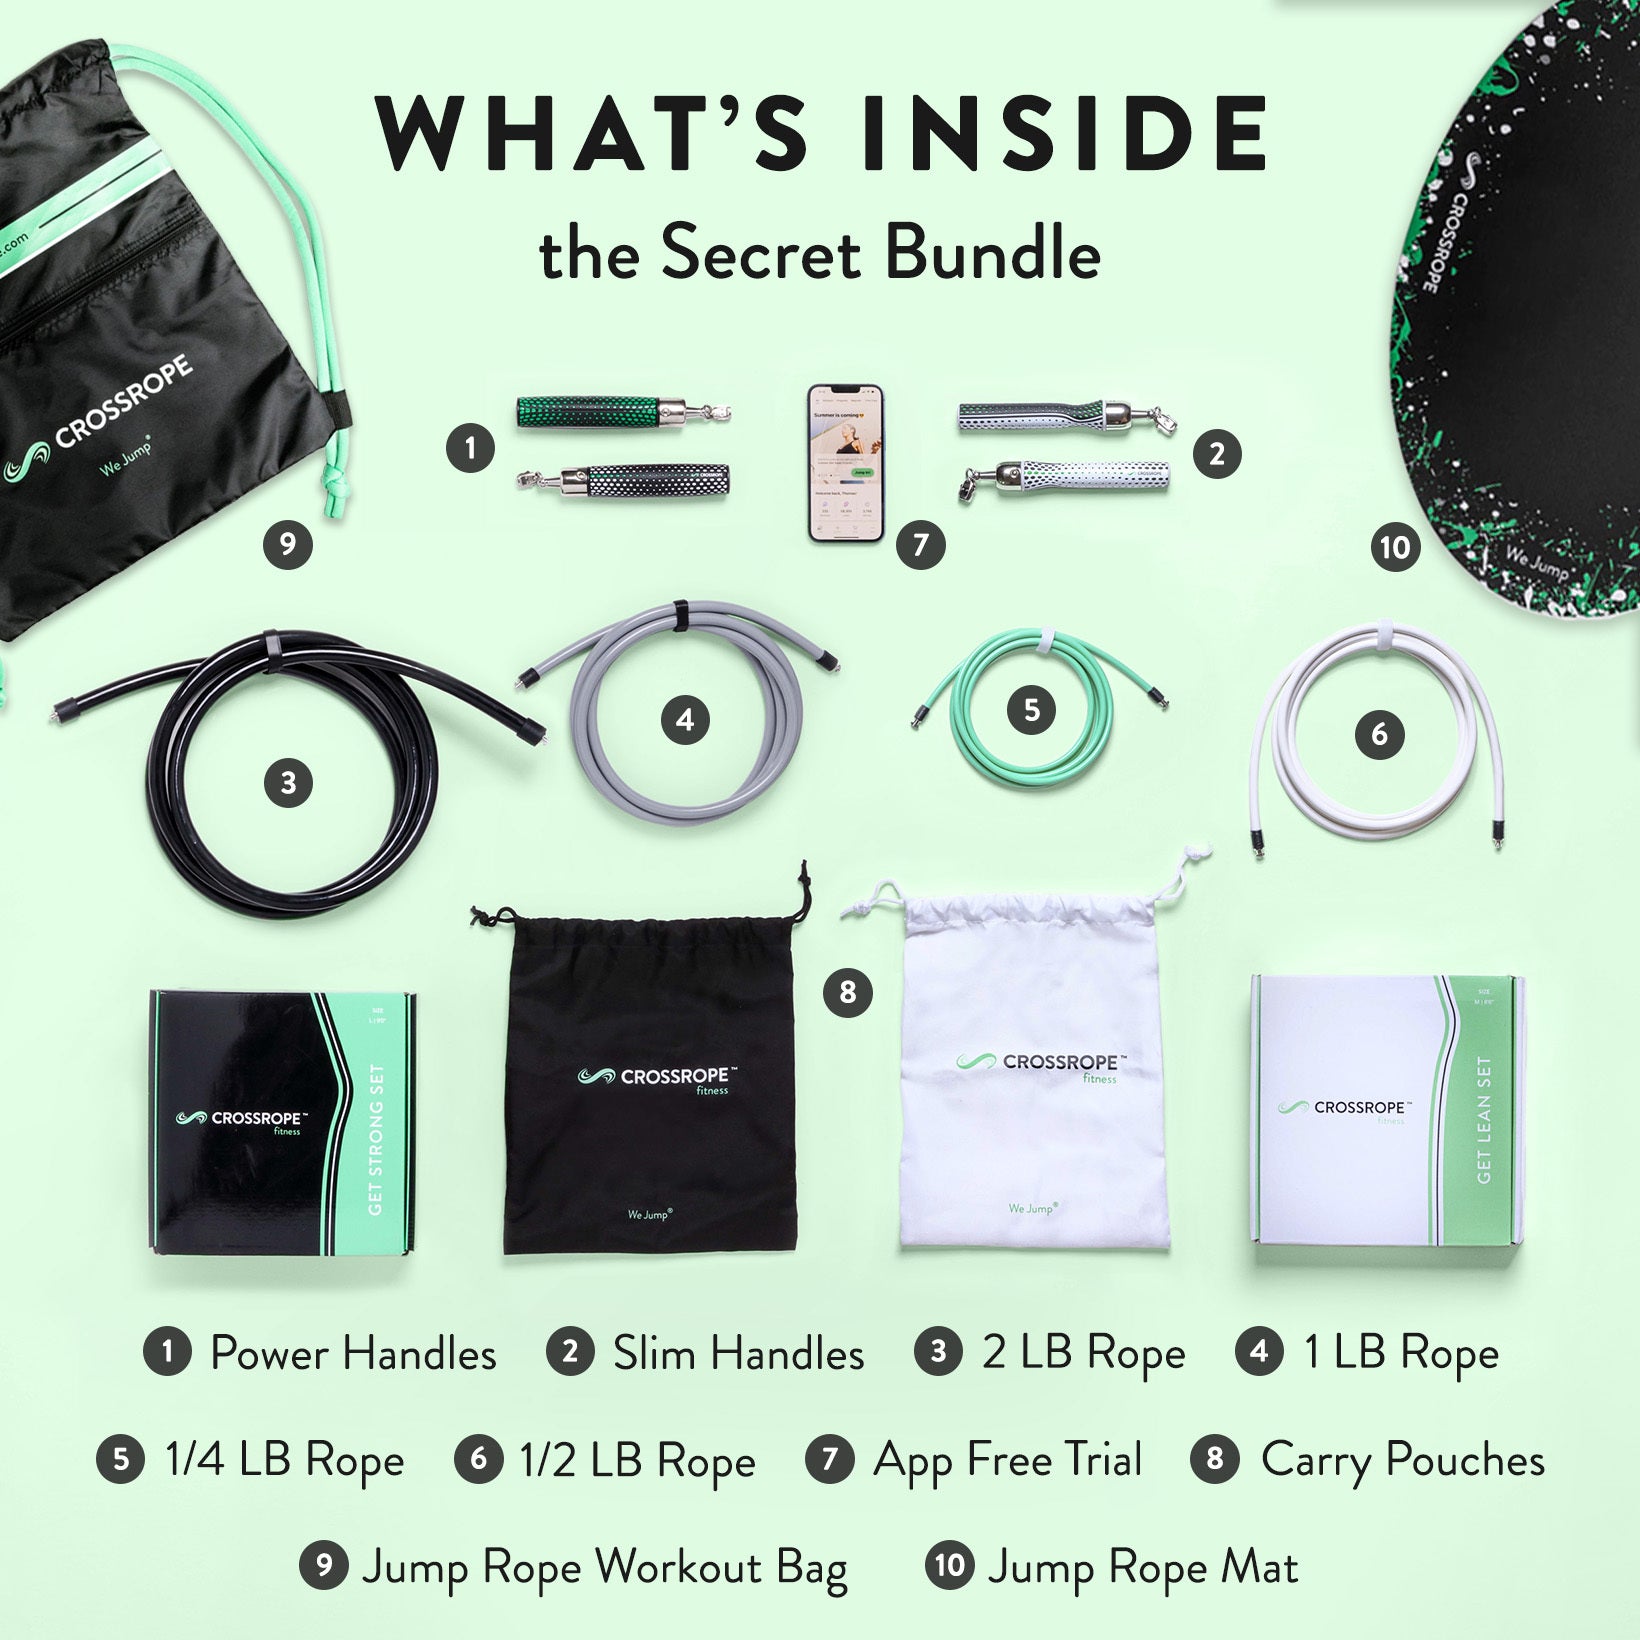 Secret Bundle What's included graphic for the Secret Bundle - a Get Fit Bundle, a workout bag, a jump rope mat